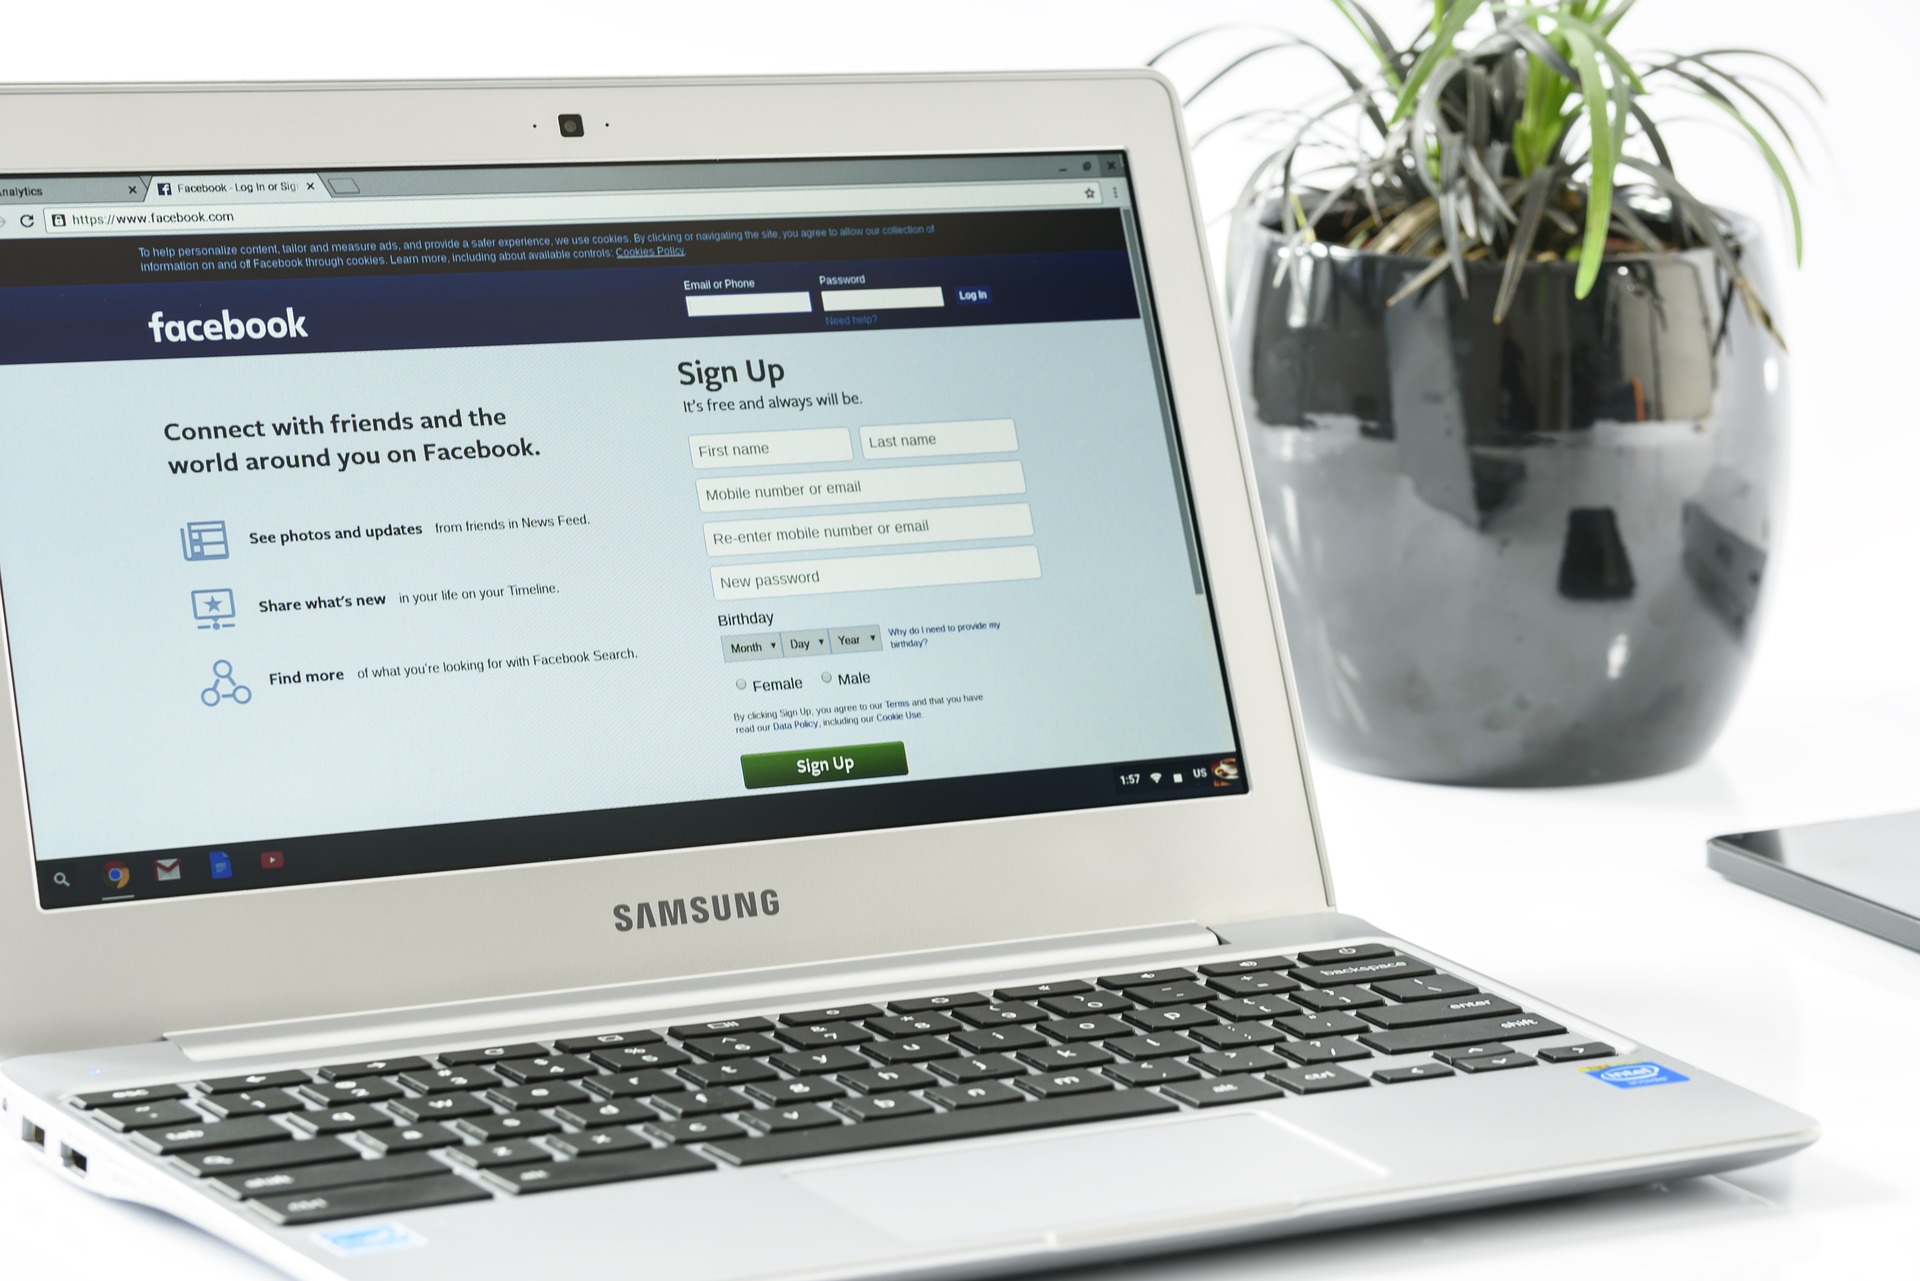 A laptop showing the Facebook login